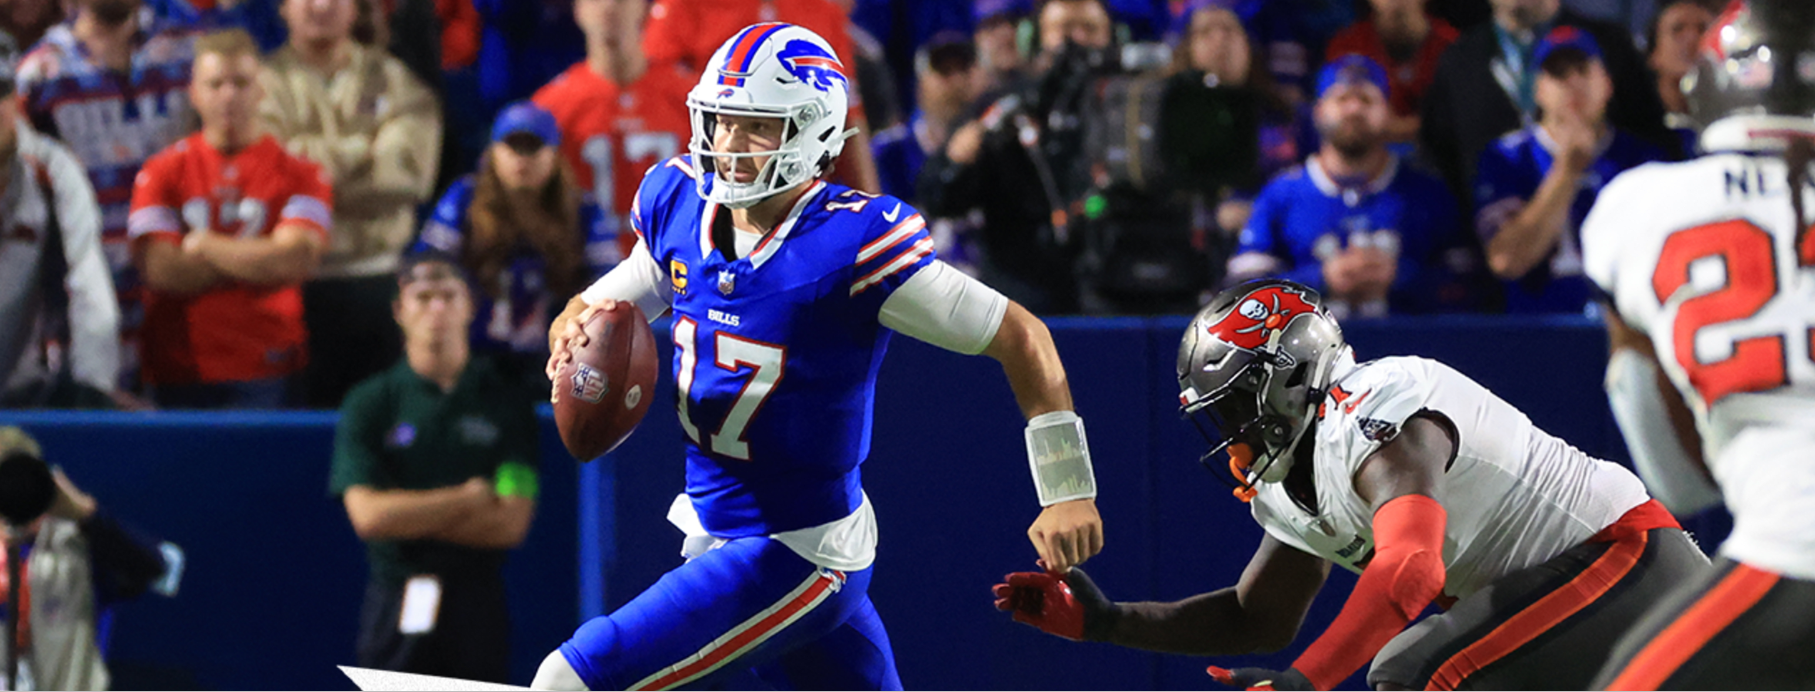 "Bills Defeat Buccaneers 24-18 | Game Summary, Key Moments, and Notable Statistics"